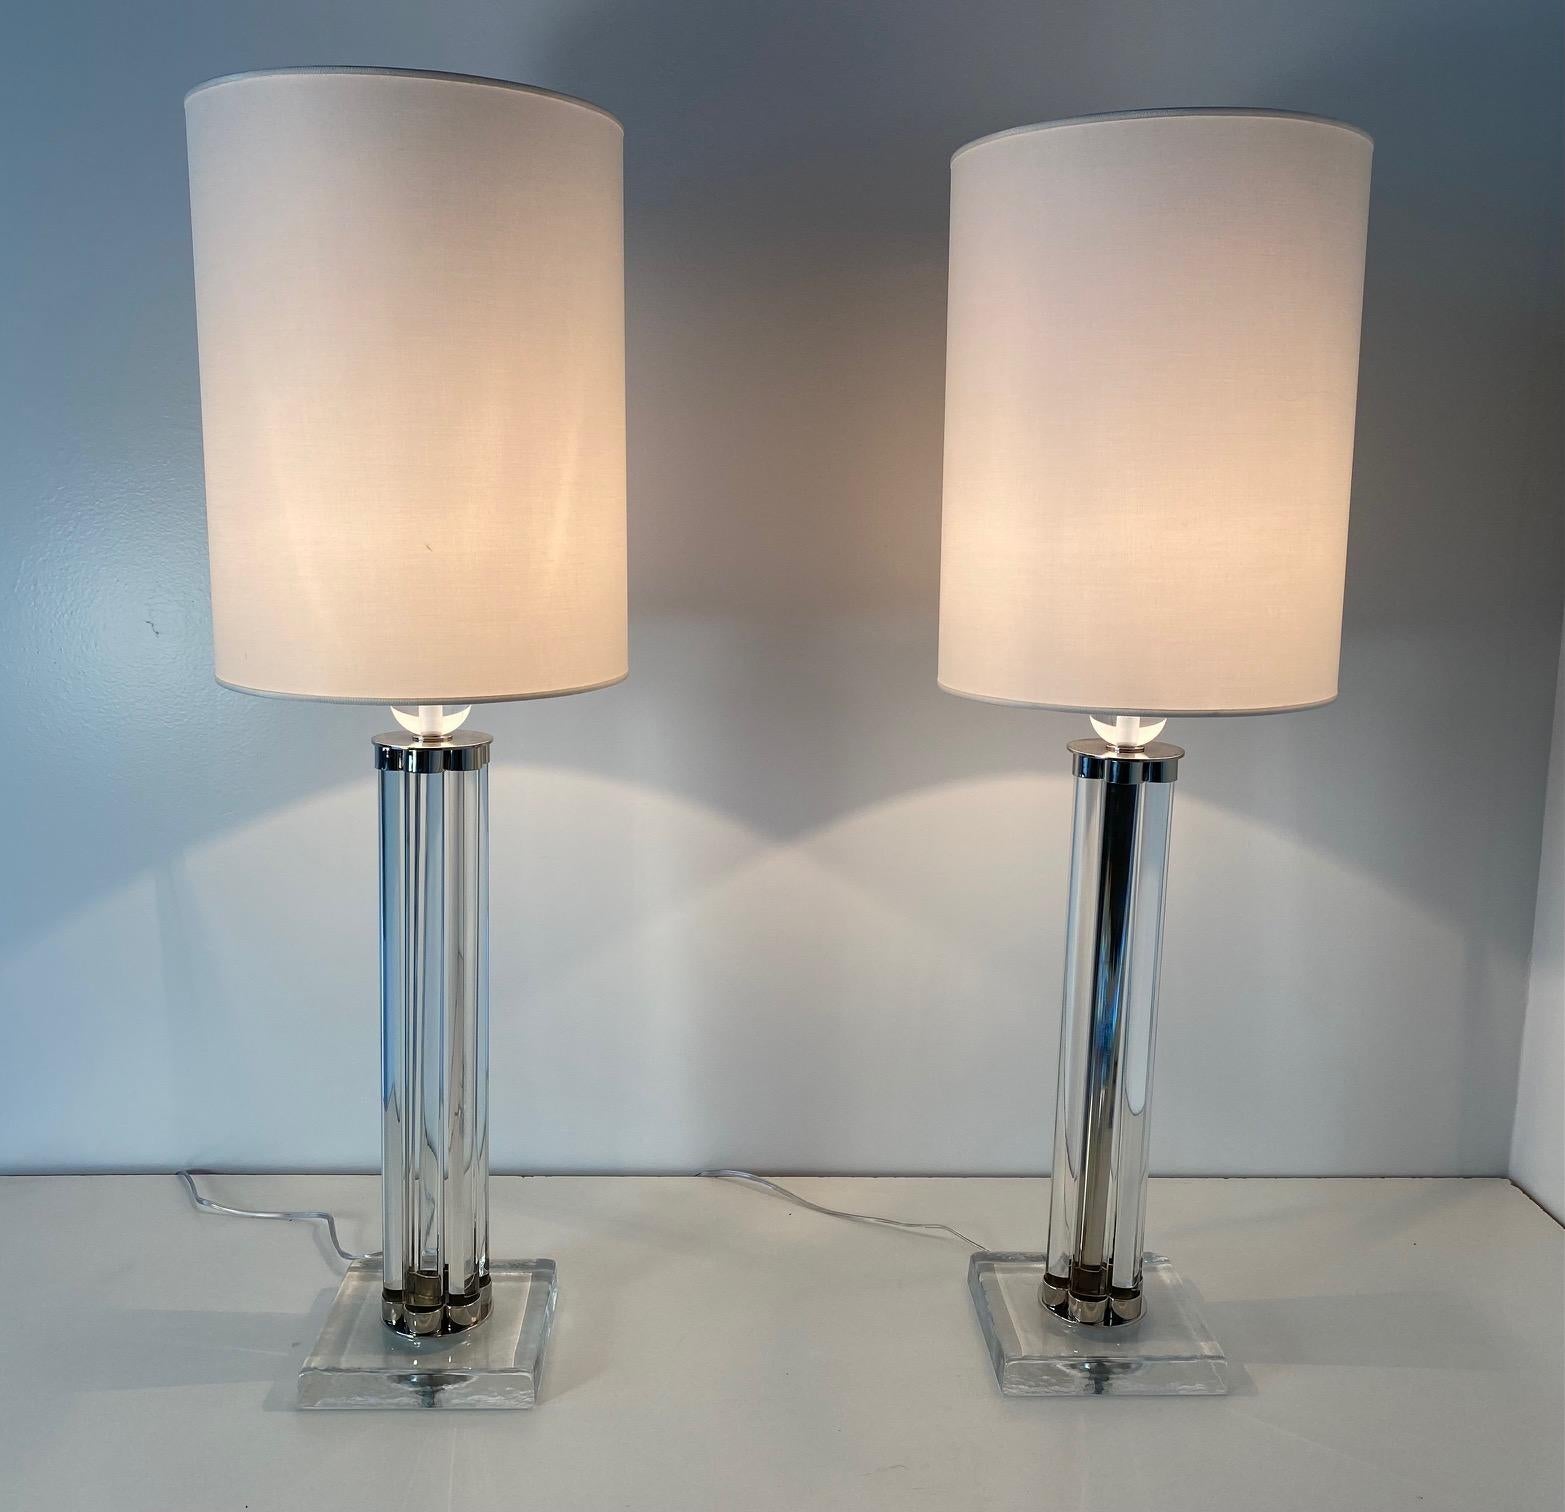 This pair of Murano lamps was produced in Italy in the early 2000s.
The lamps are completely in Murano glass and chrome details, while the lampshade is white. 